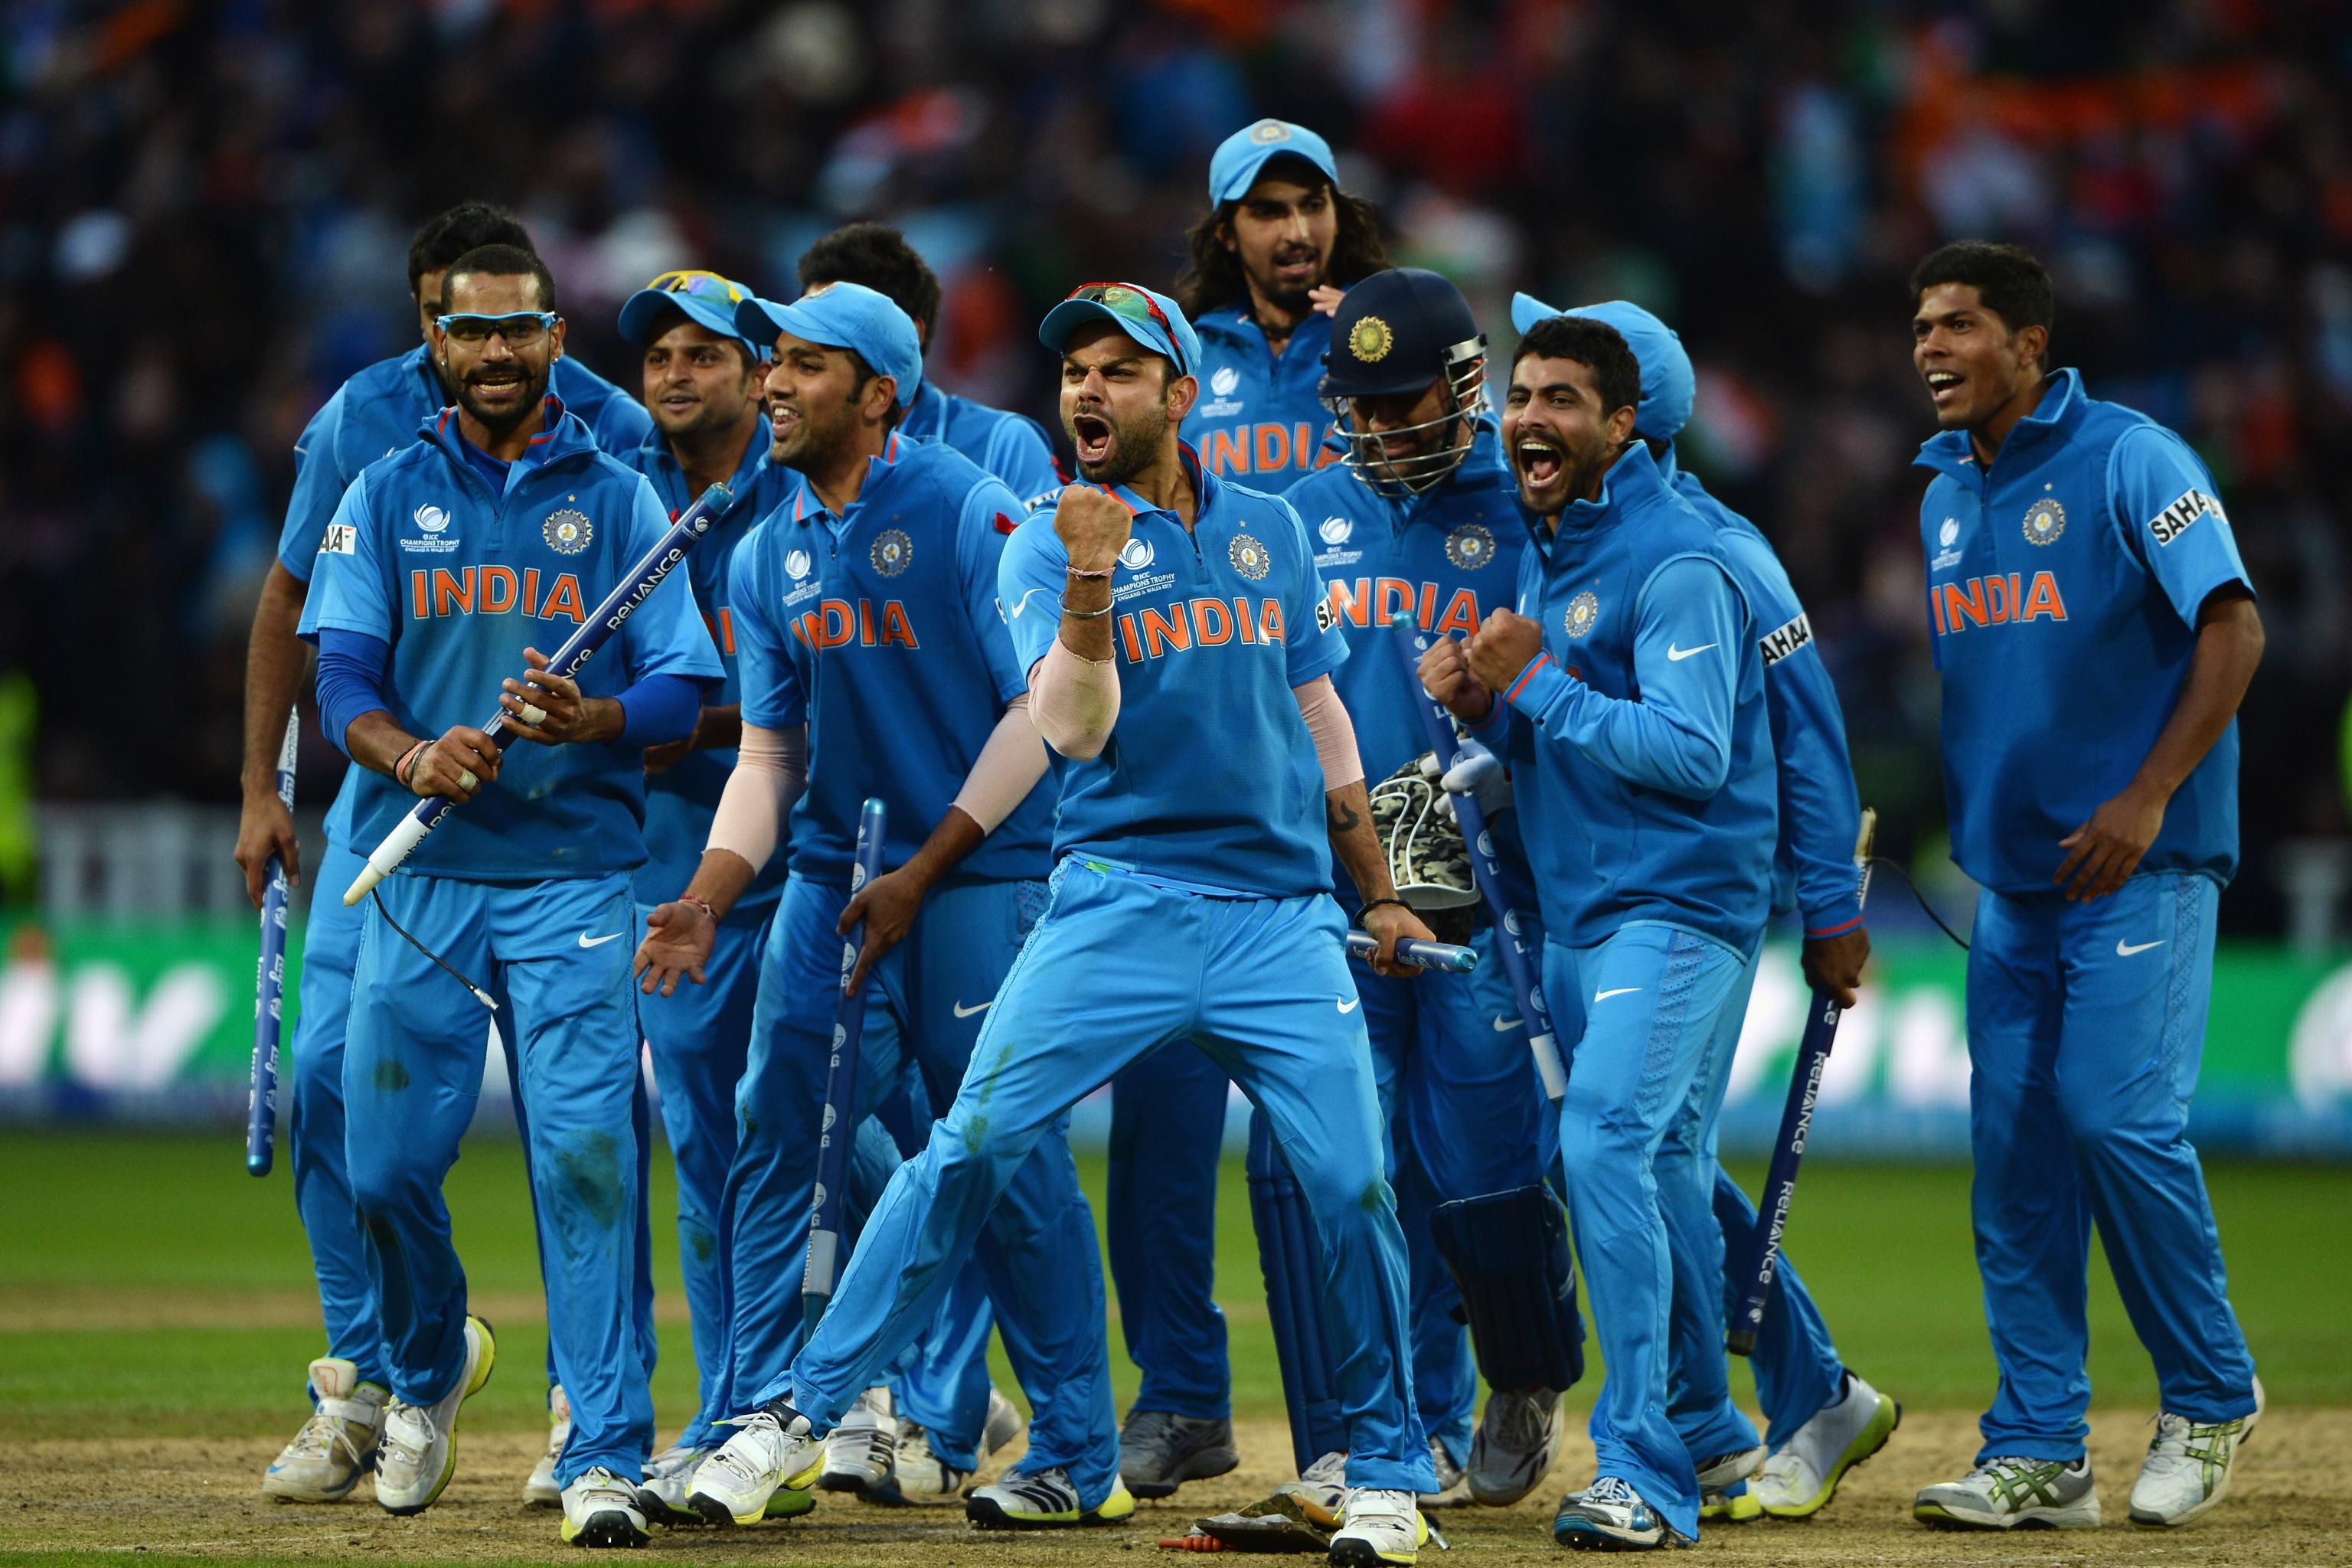 Elendig Først Turist ICC Champions Trophy Final 2013: England vs. India Score, Recap and More |  News, Scores, Highlights, Stats, and Rumors | Bleacher Report